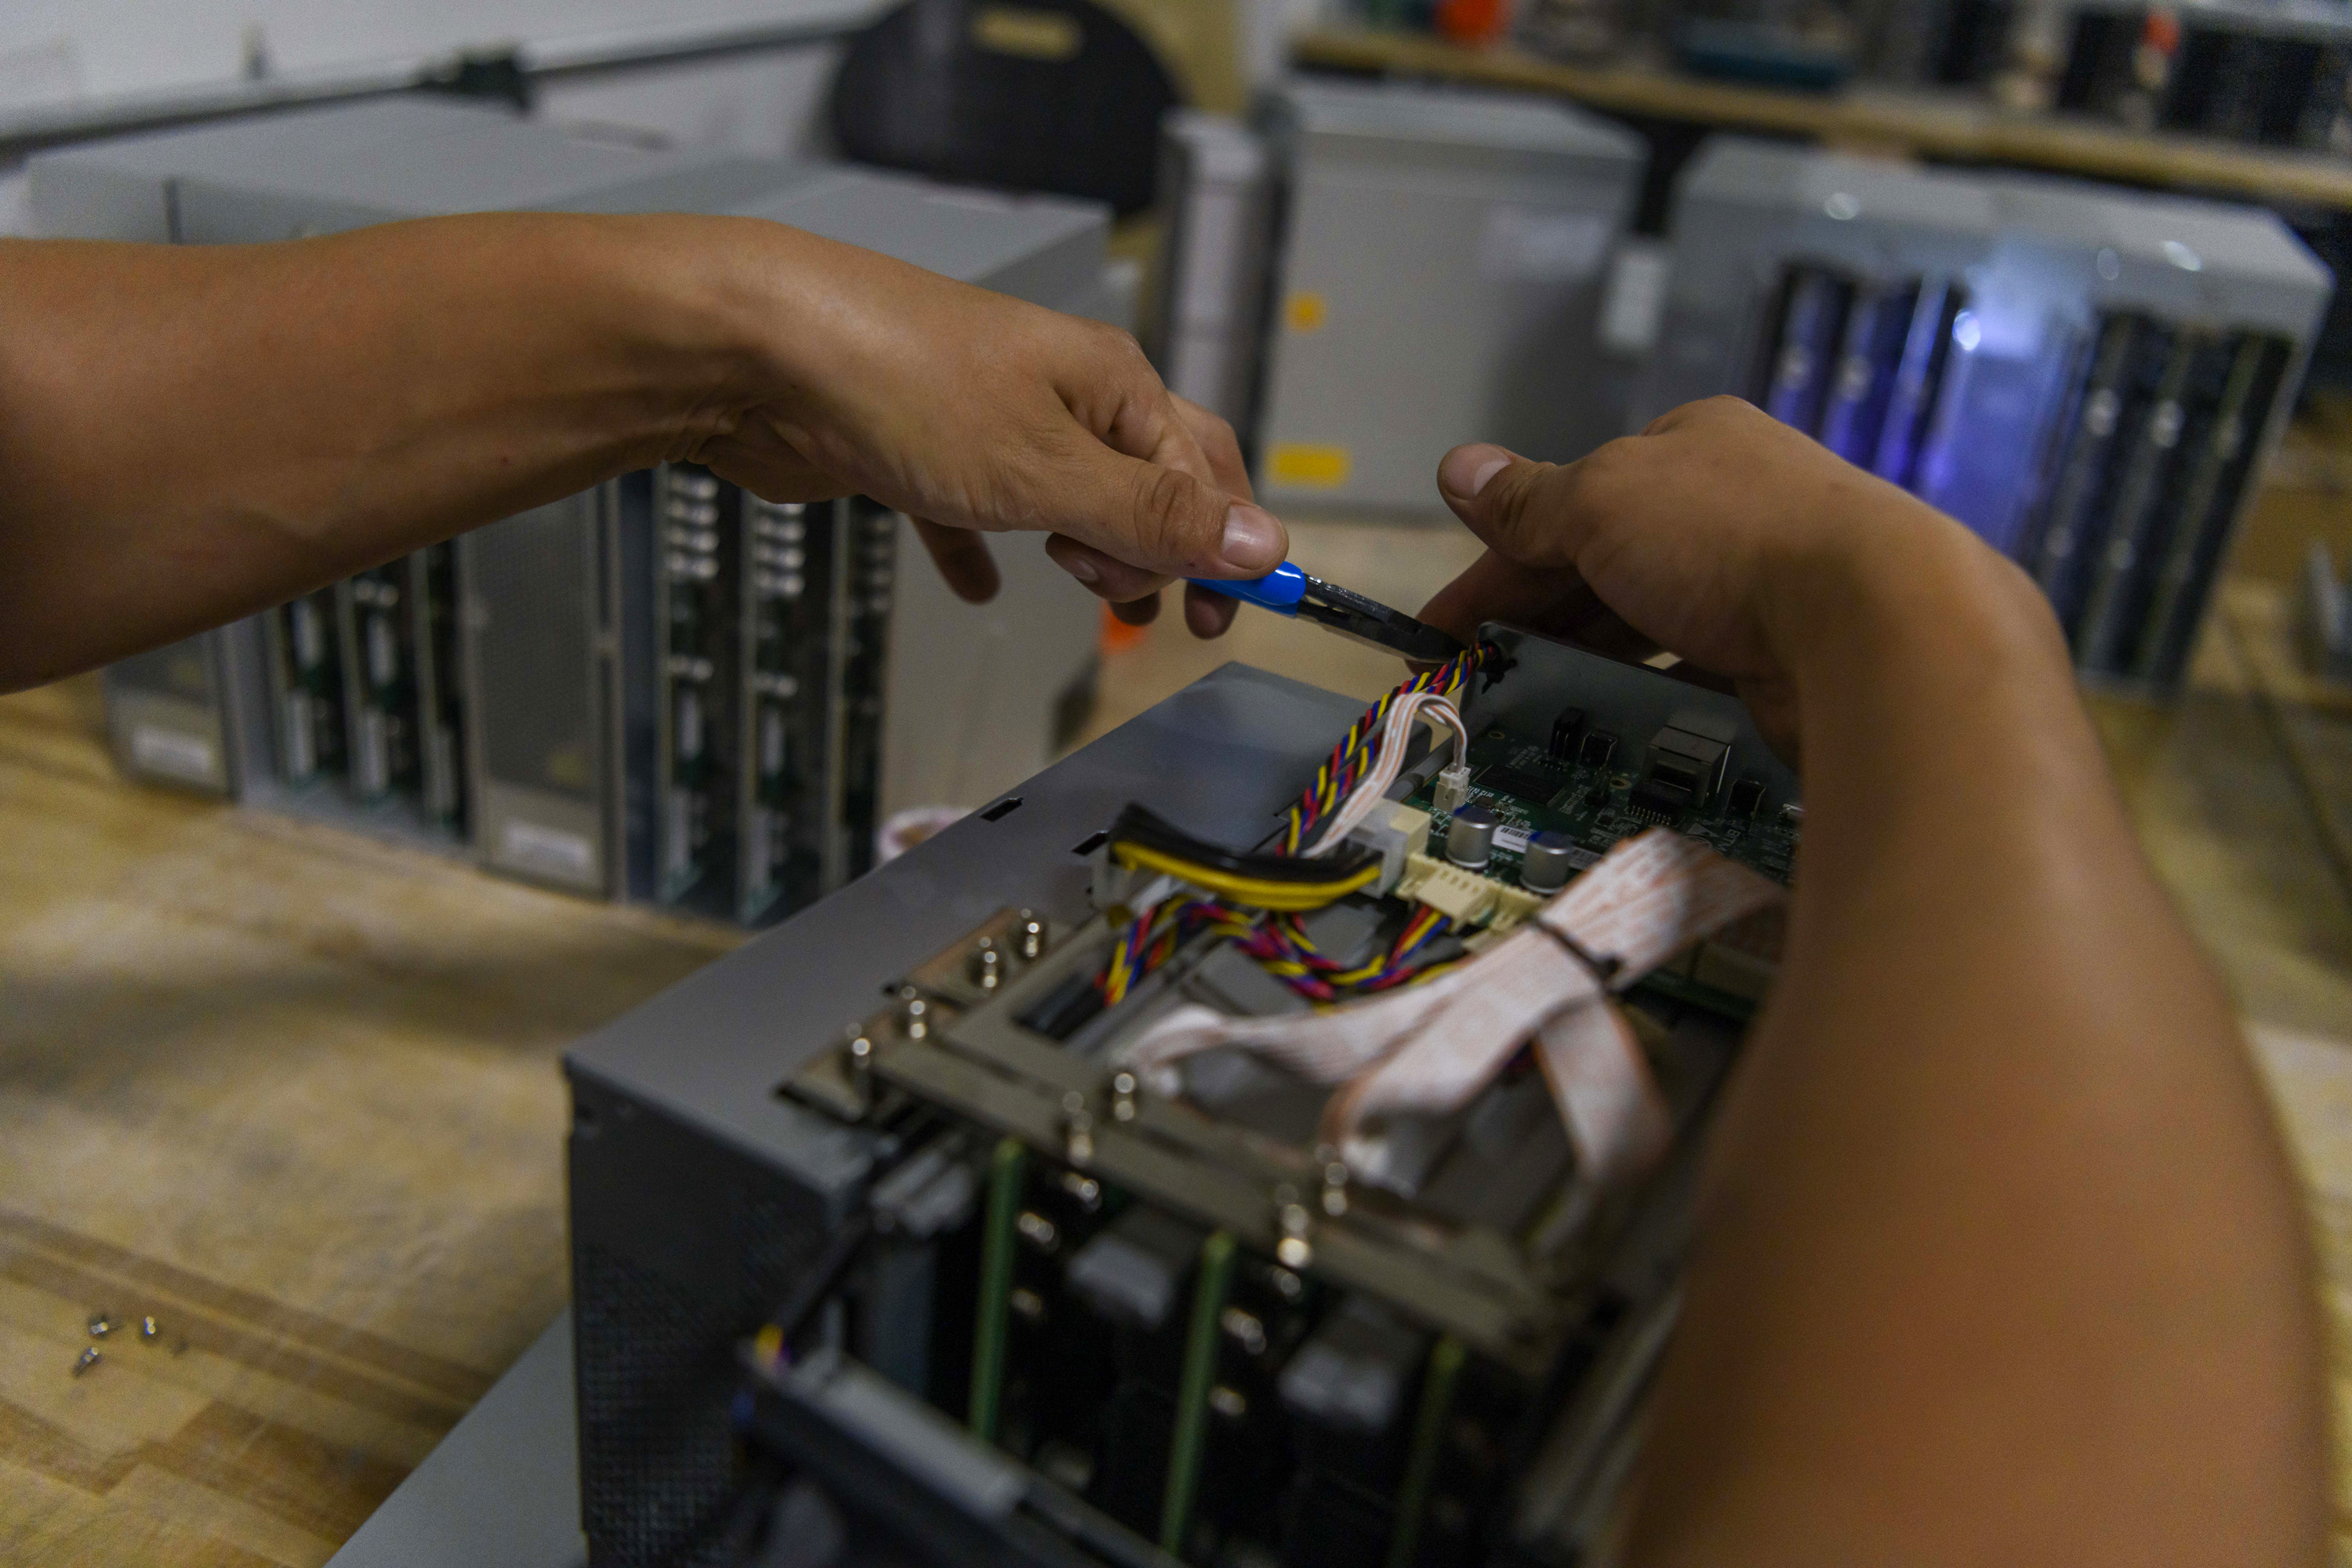 A Helios employee takes apart ASIC mining servers, computers deployed to mine Bitcoin, and gets them ready to be installed into the pods, near Afton on Sept. 15, 2022.